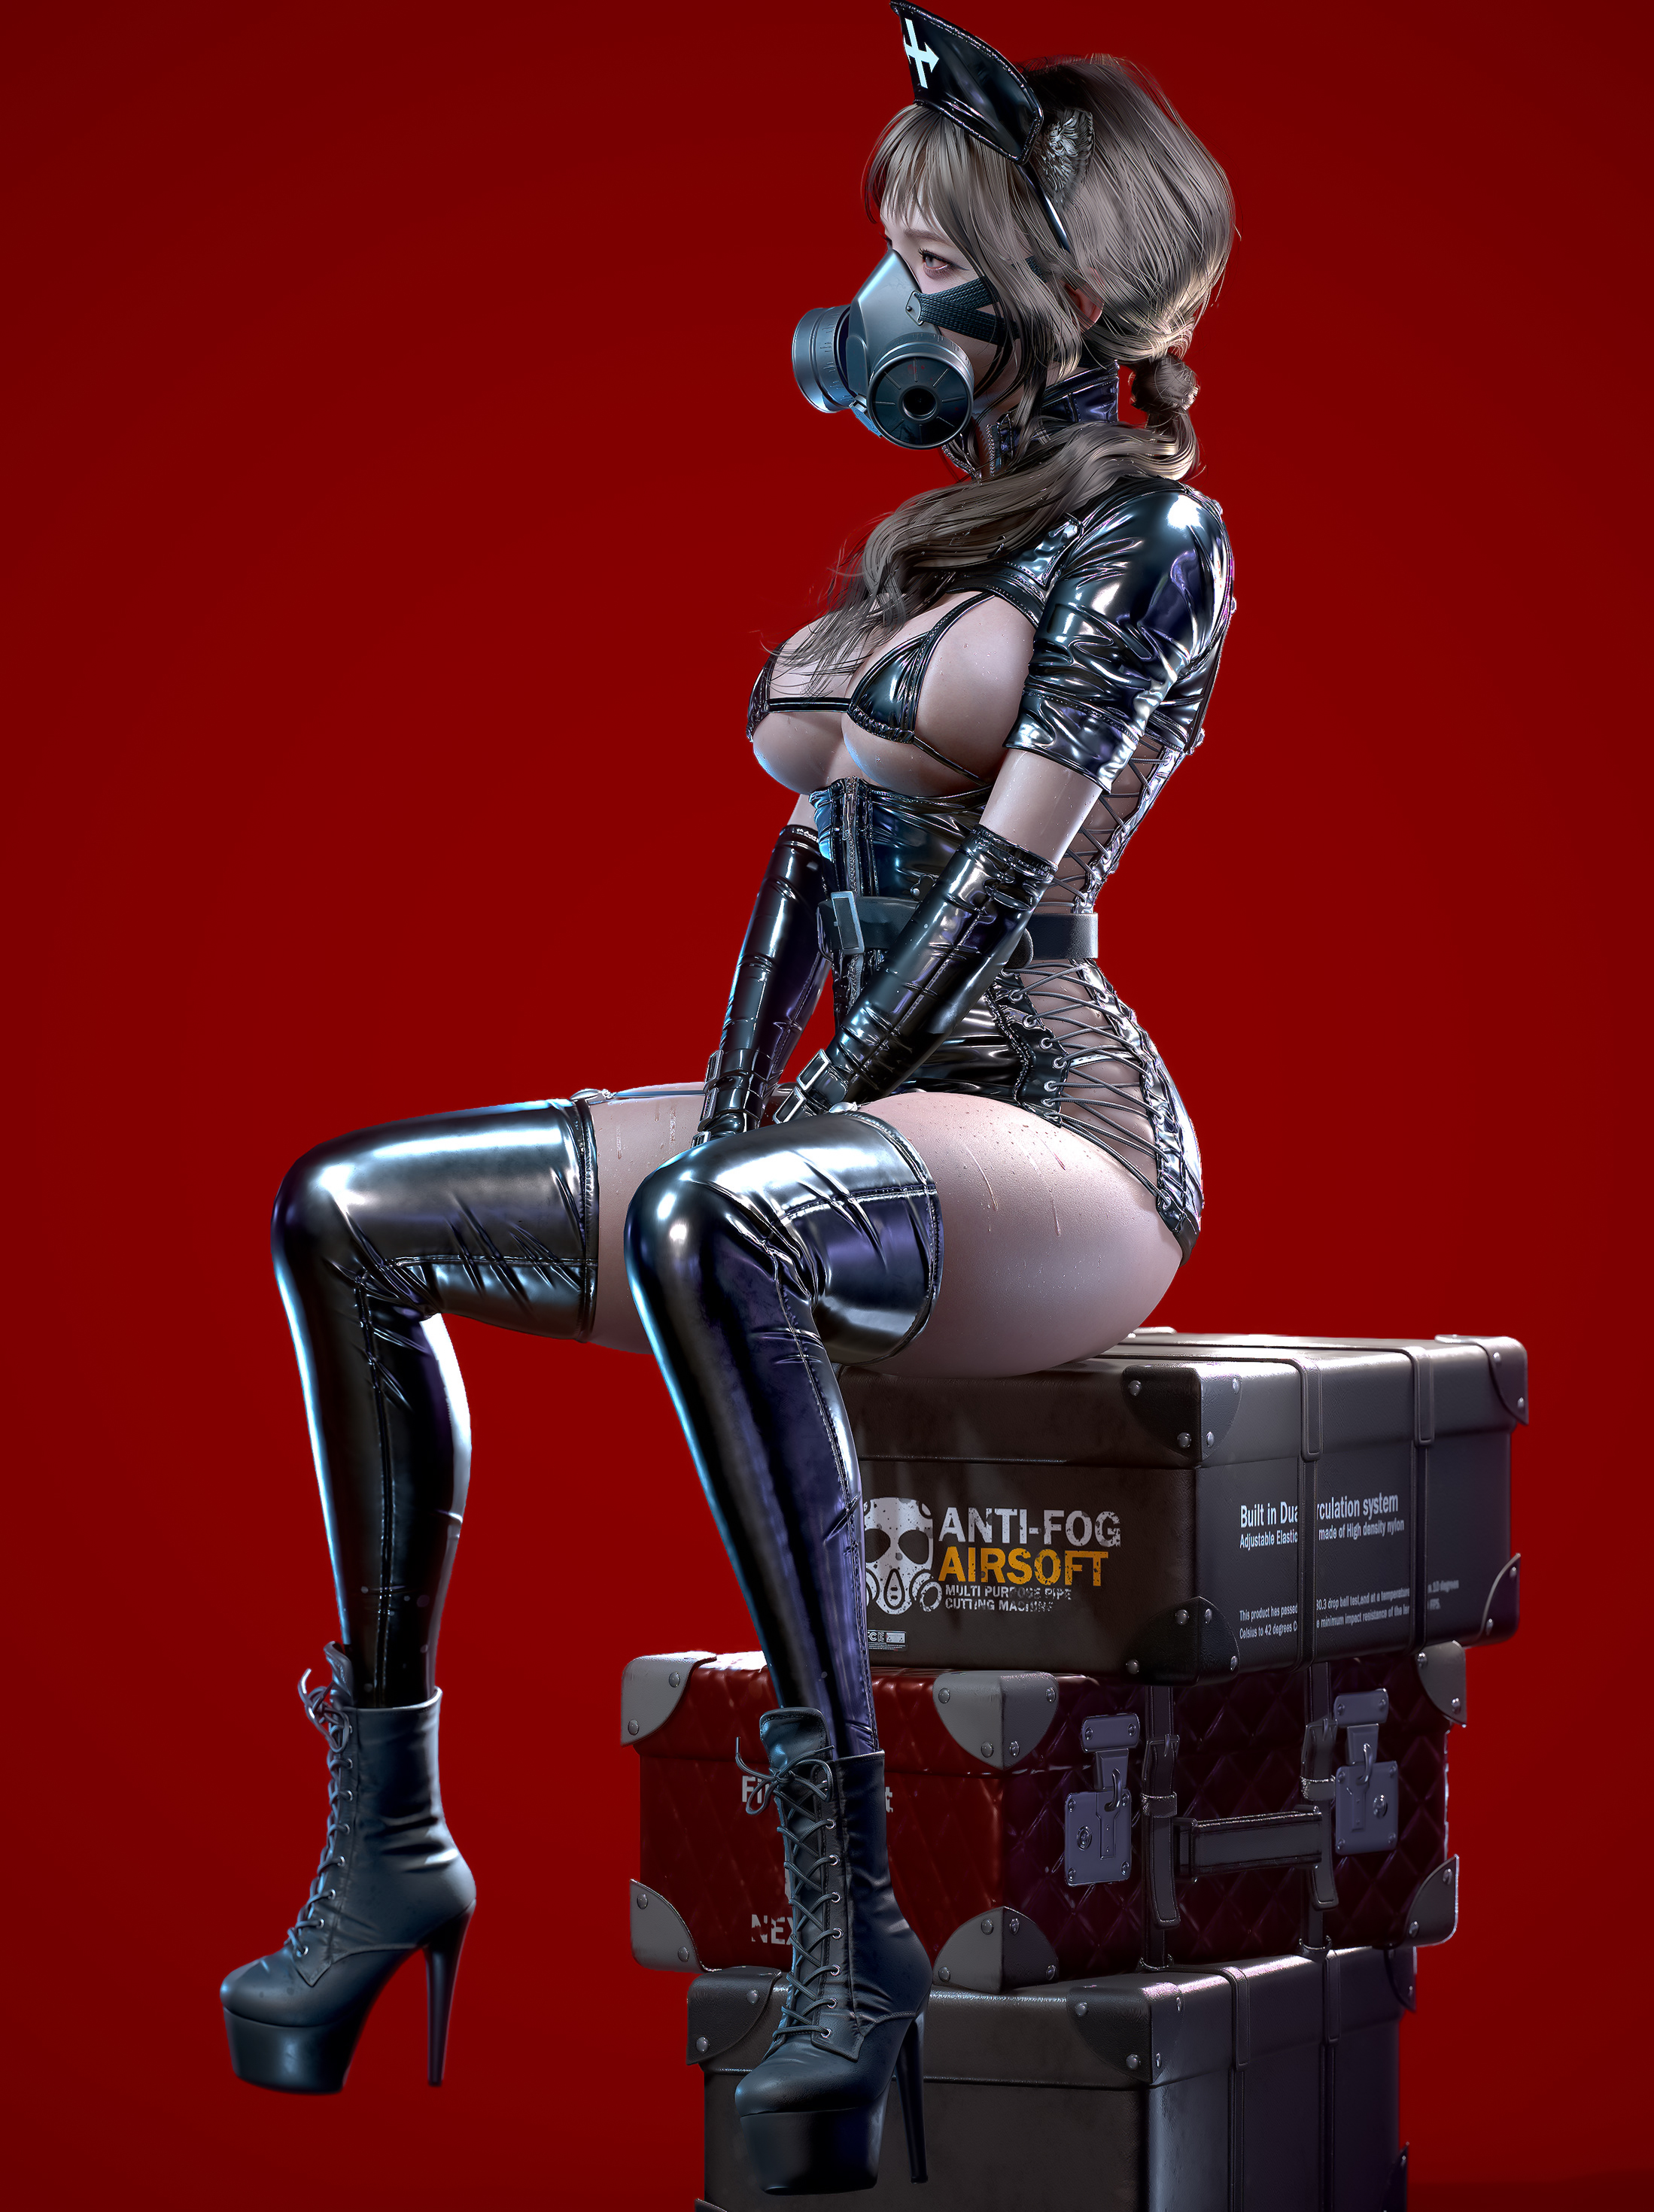 General 2198x2940 Nyl CGI women brunette gas masks mask latex skimpy clothes thigh high boots chests red background wet